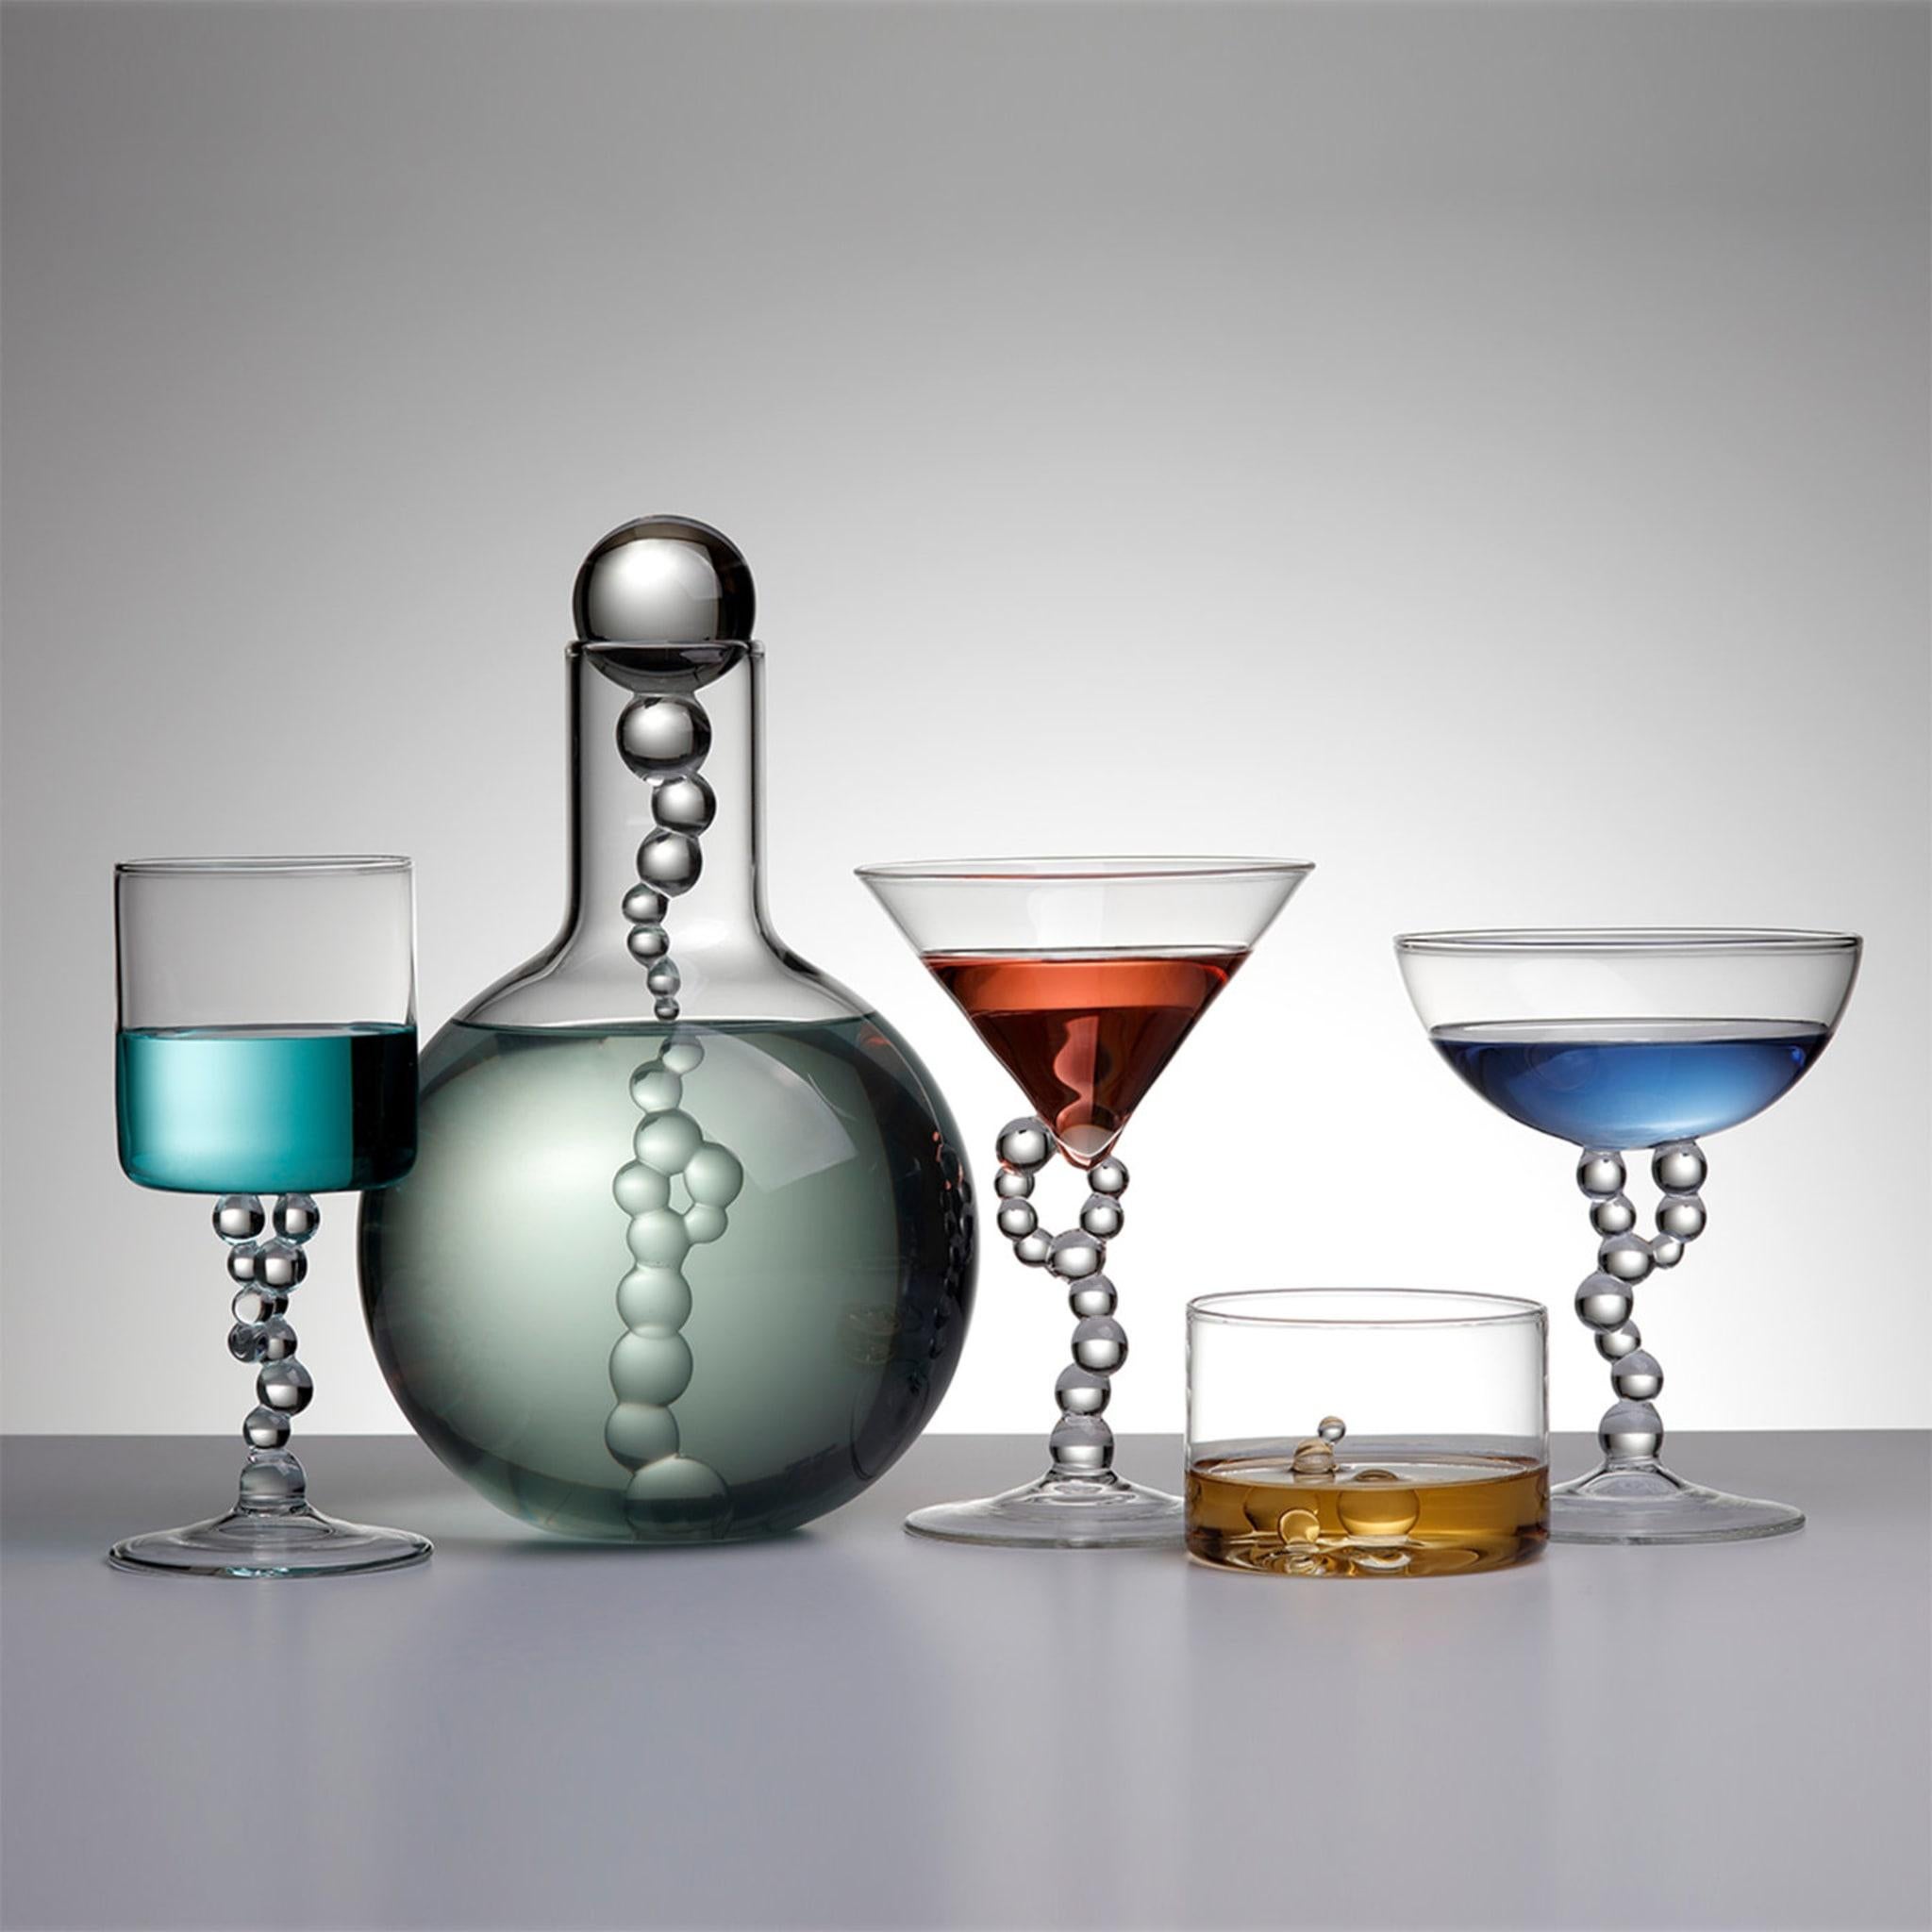 A collection composed of bottles, wine glasses, cocktail glasses and whiskey glasses, born from an ironic reinterpretation of chemical laboratory glassware. Vials, test tubes, funnels, and cylinders are
transformed into domestic objects, from which